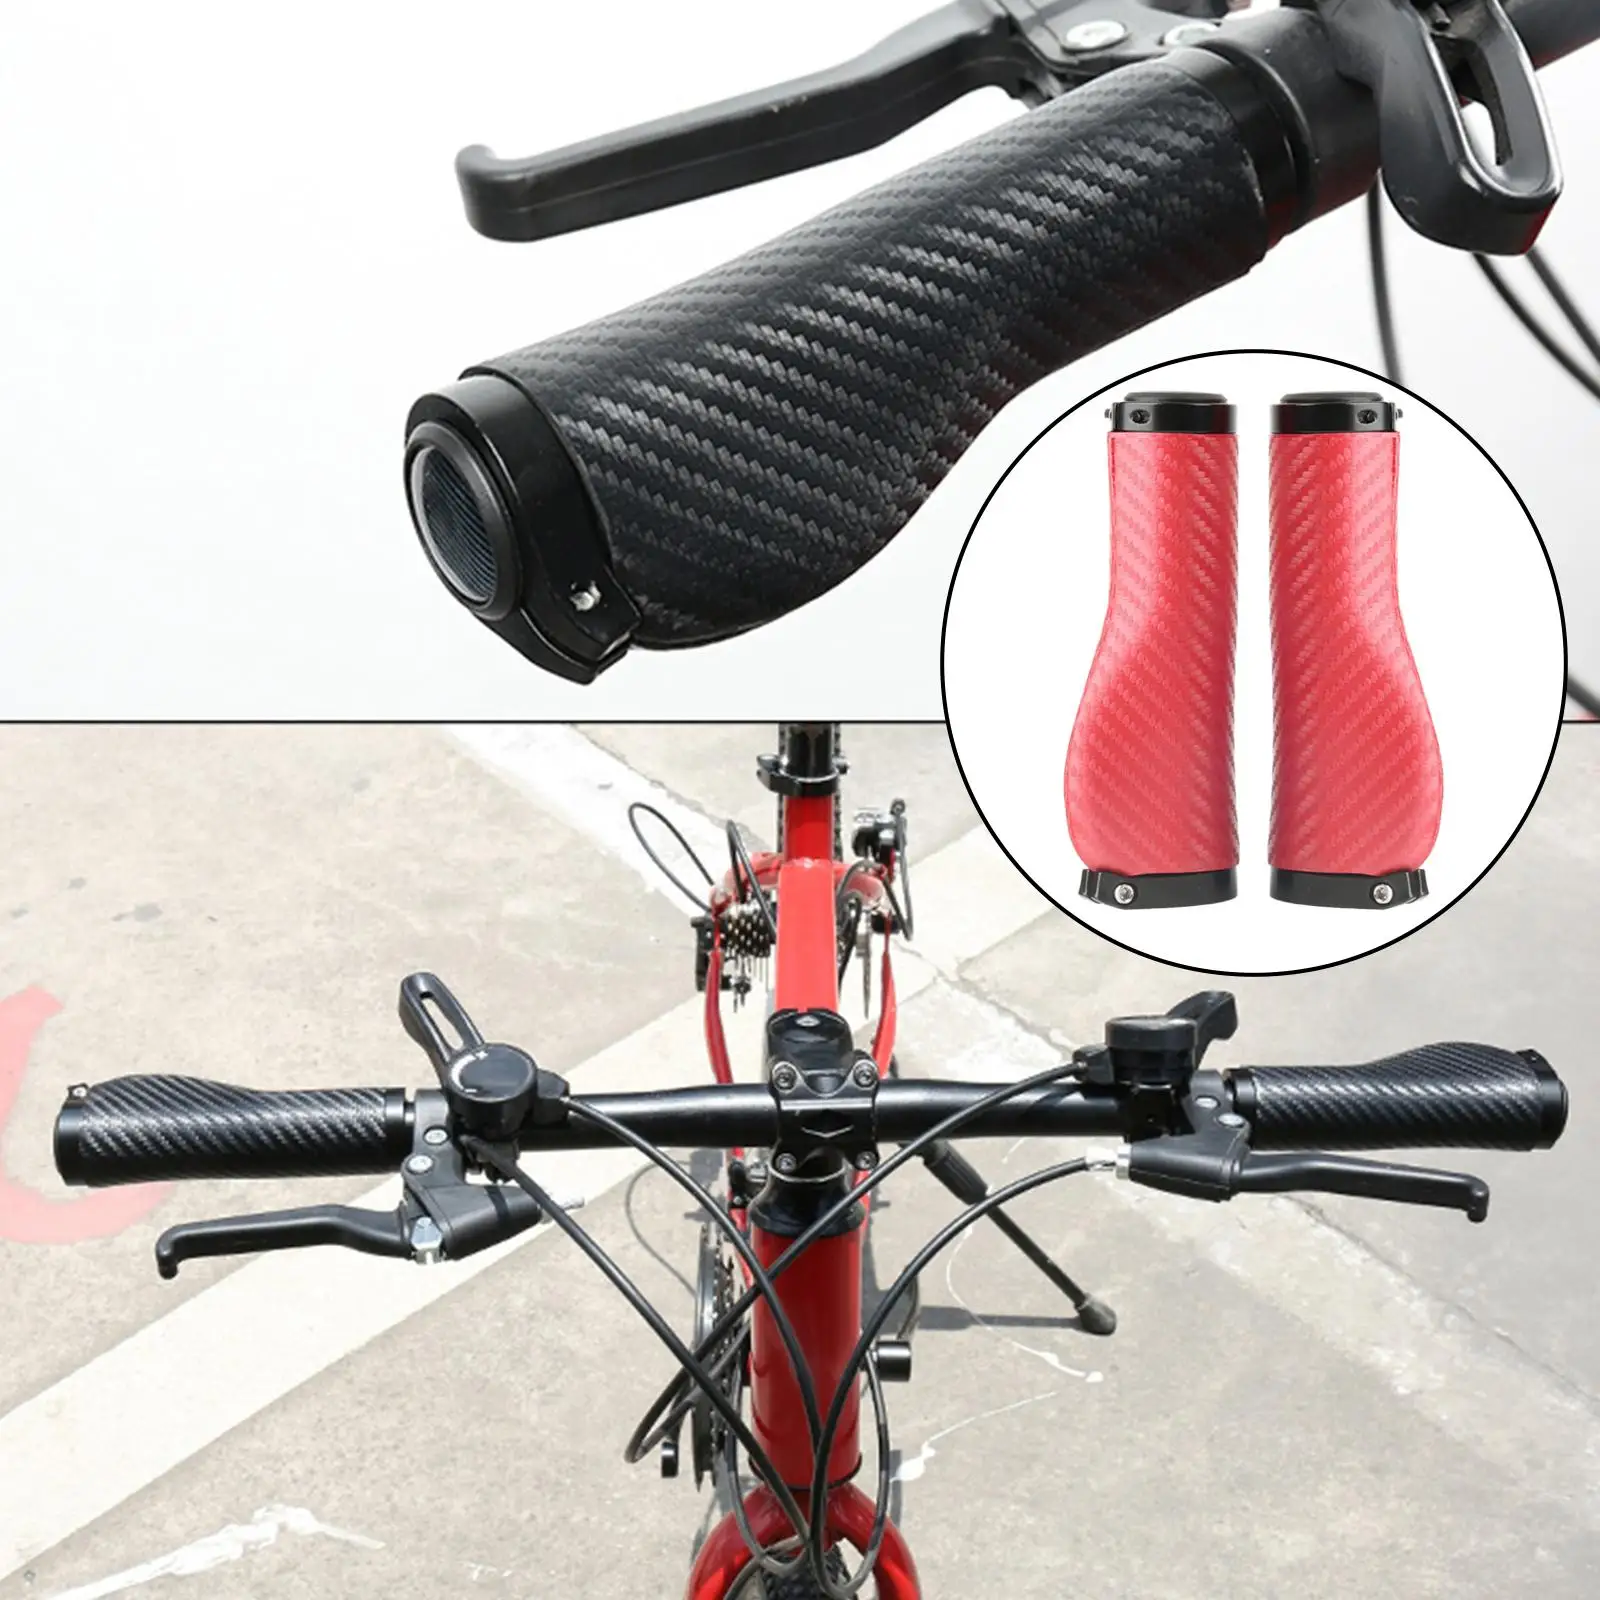 2Pcs PU Leather Bicycle Handlebar Grips Anti Skid Lockable Carbon Fiber Style Bar Grips for Road Bike MTB Riding Bicycle Grips